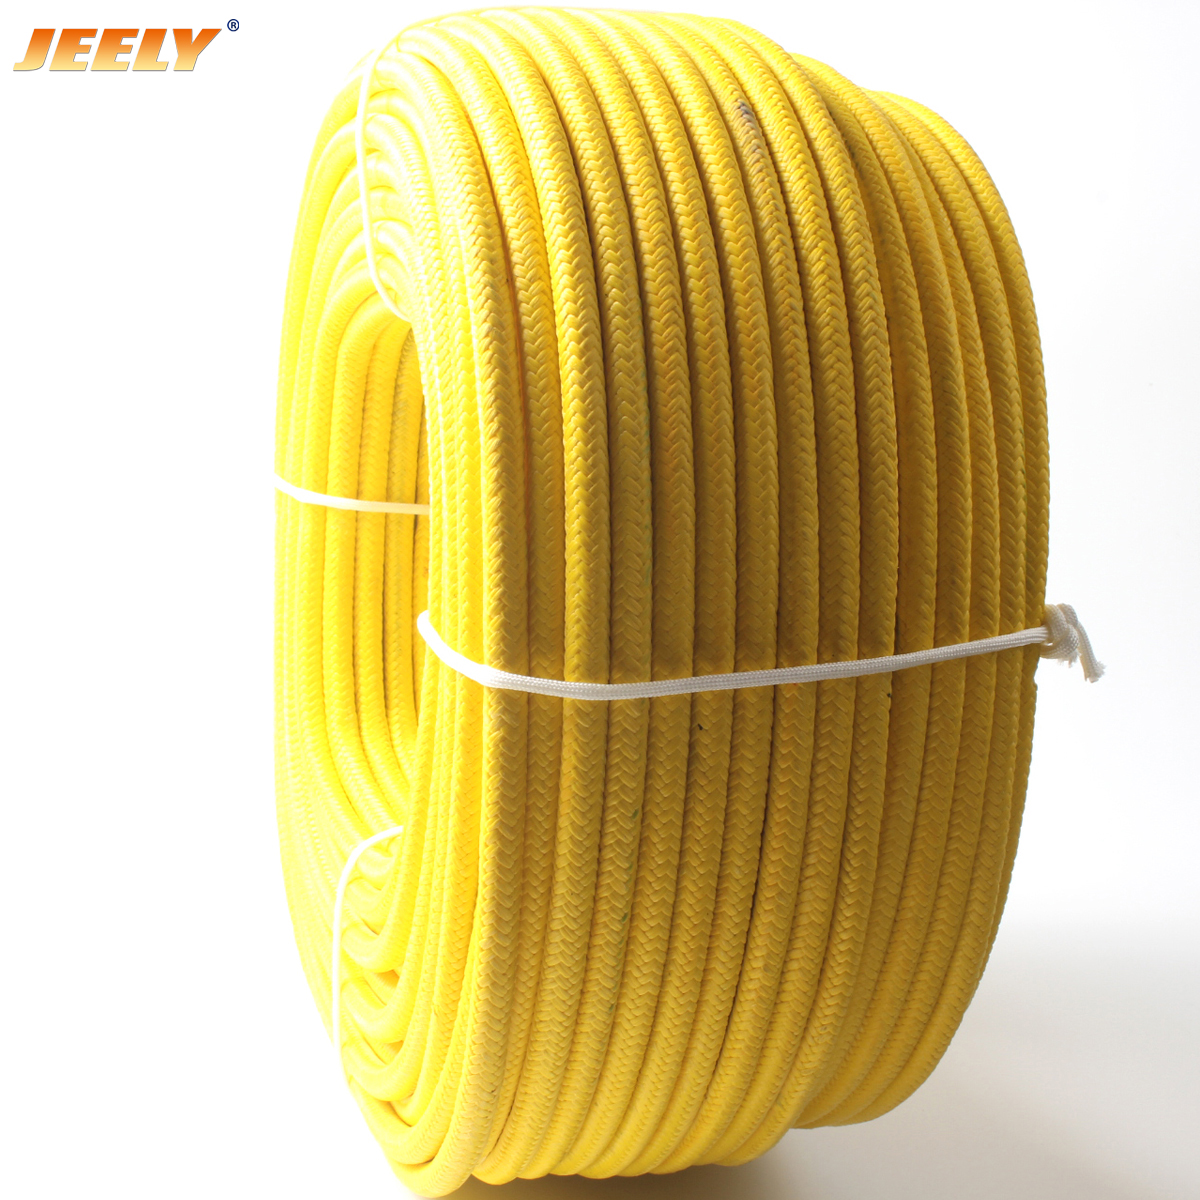 14mm 100m UHMWPE Spectra Core with Polyester Jacket Sailboat Winch Sheathed Tow Rope